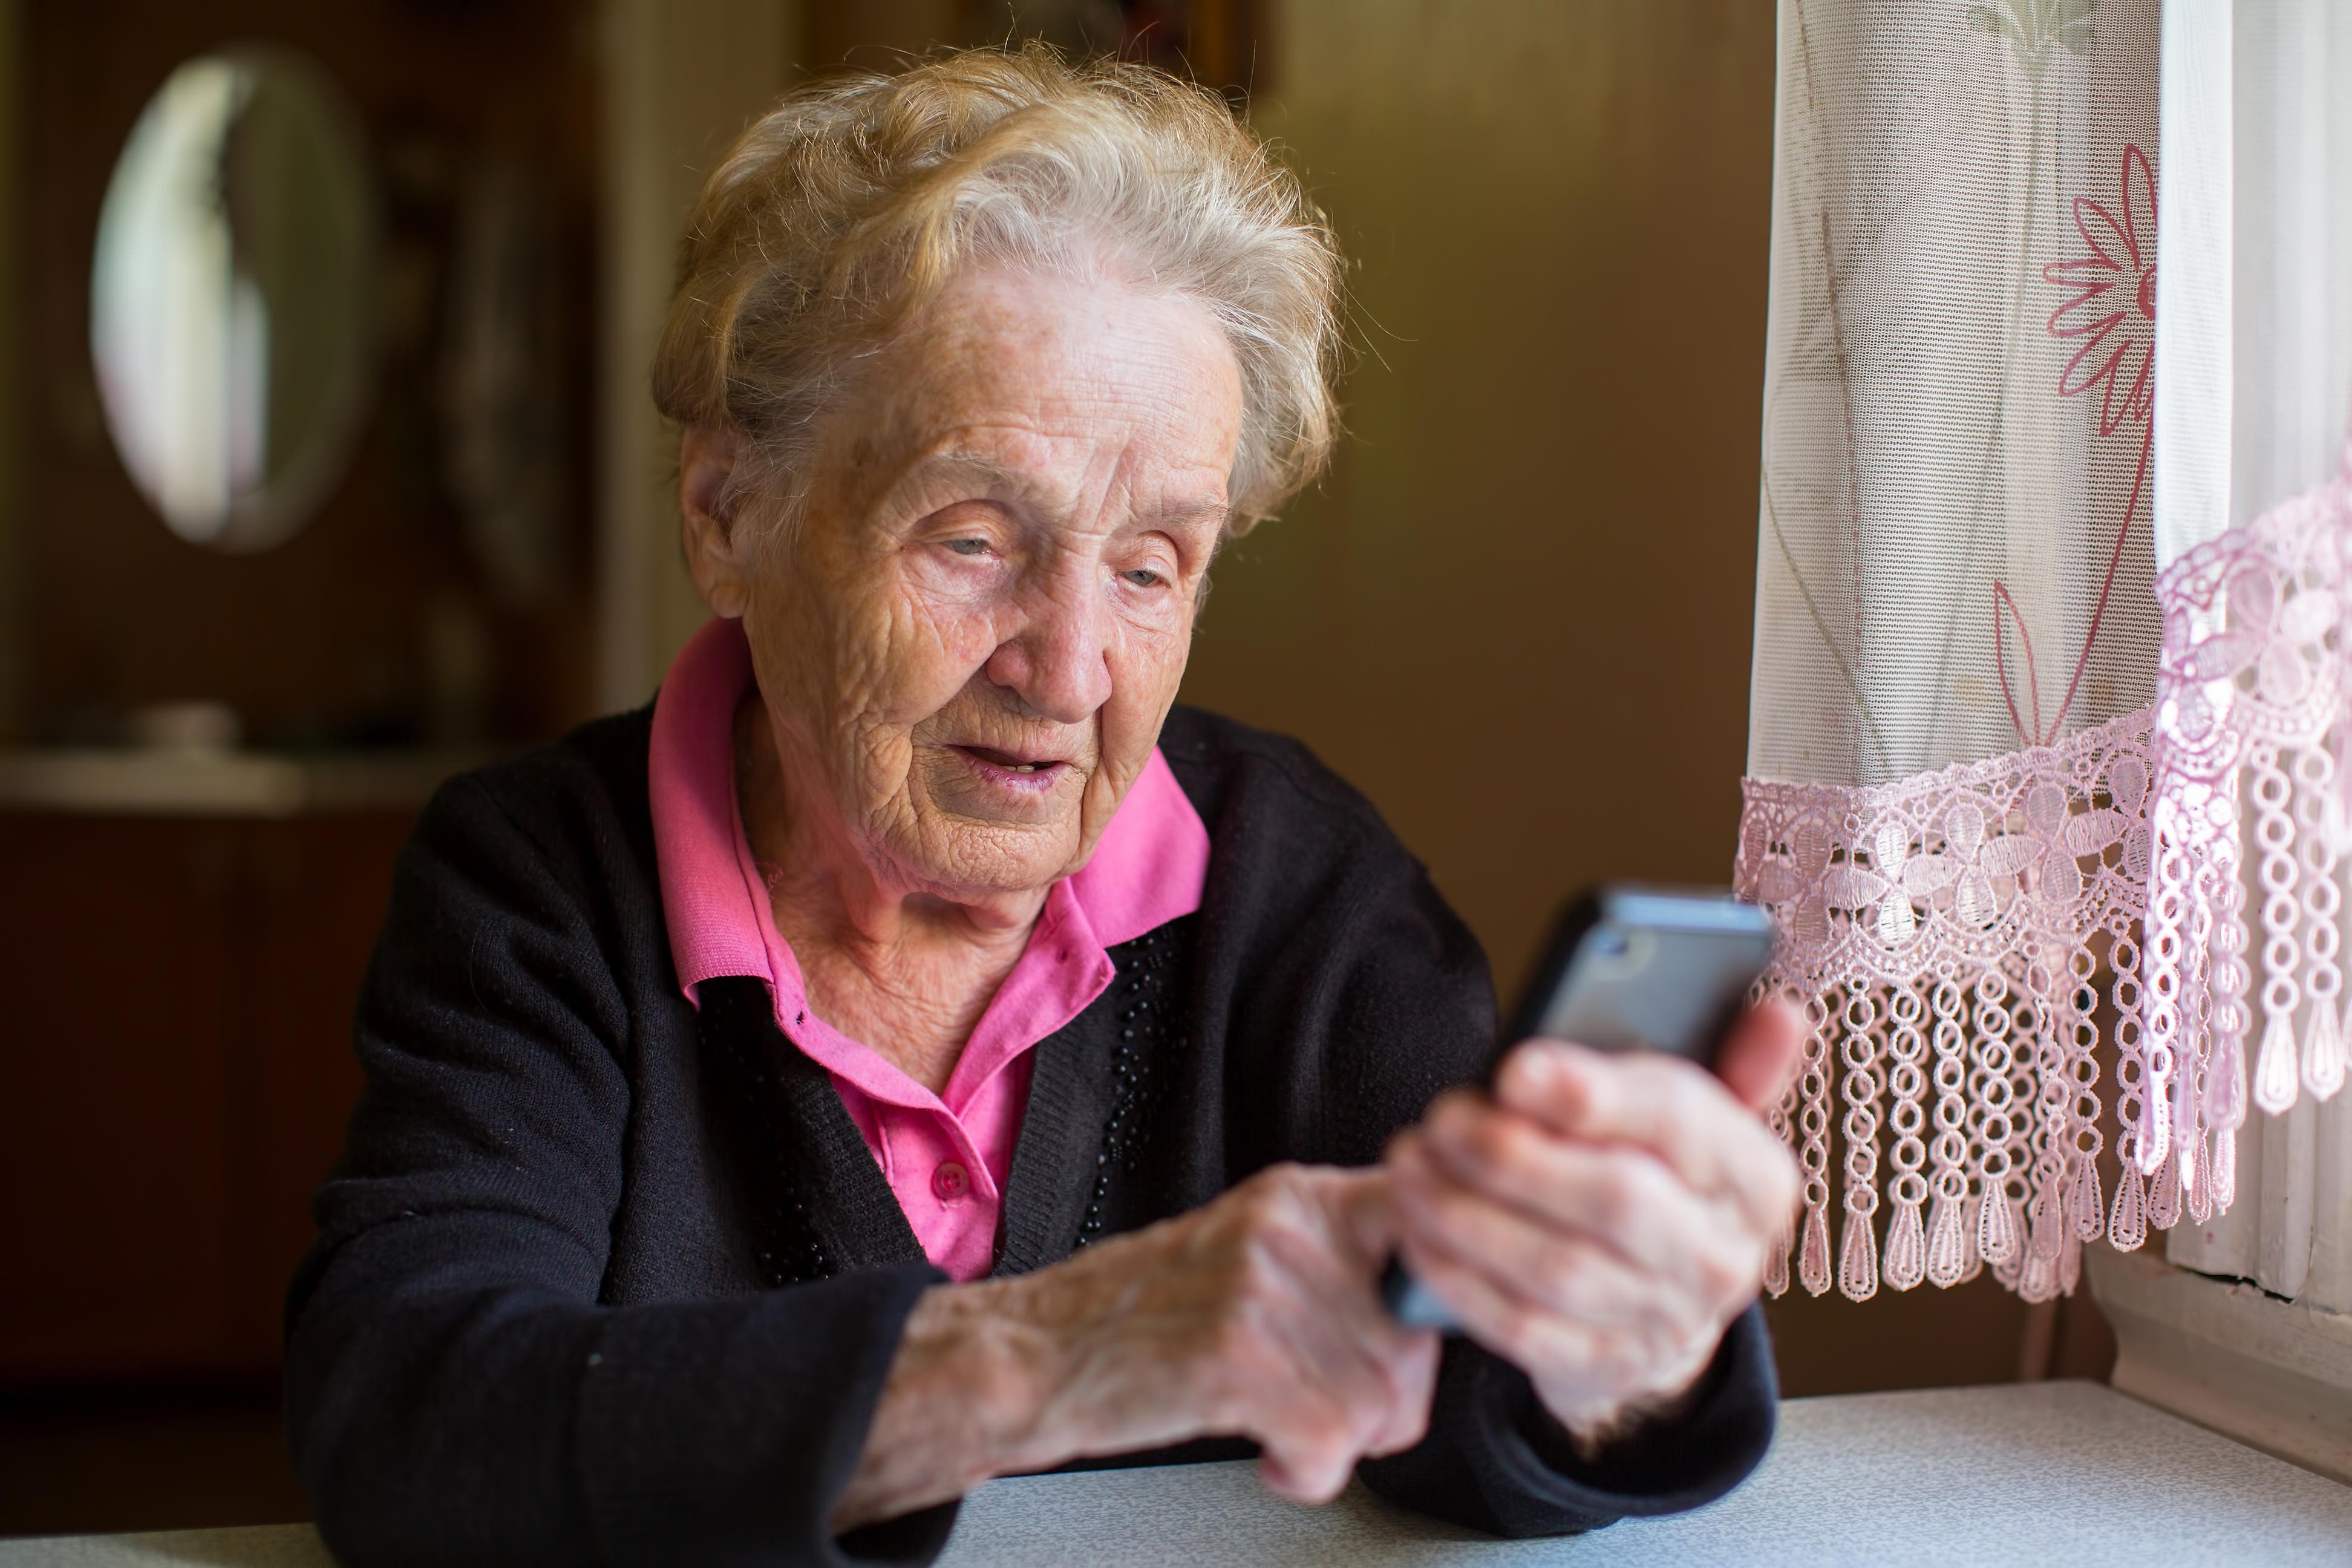 5 Awesome Gadgets For The Elderly You Need To Buy – ApeCape